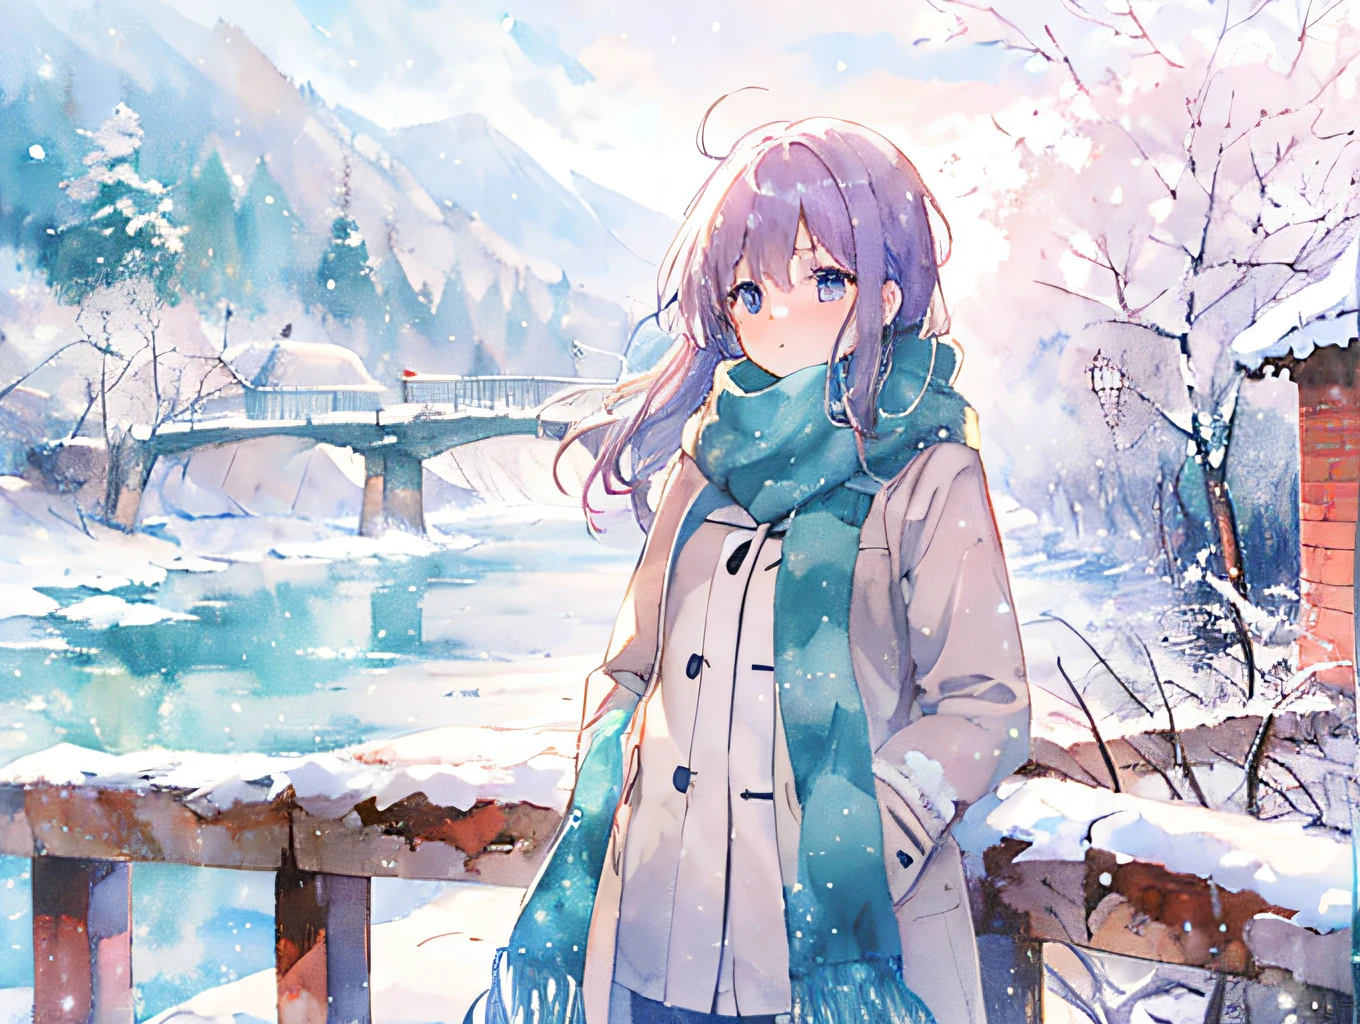 anime-style girl, bridge, snowy landscape, warm coat and scarf, visible breath, soft, watercolor-like anime style, whites and blues, snowy day,